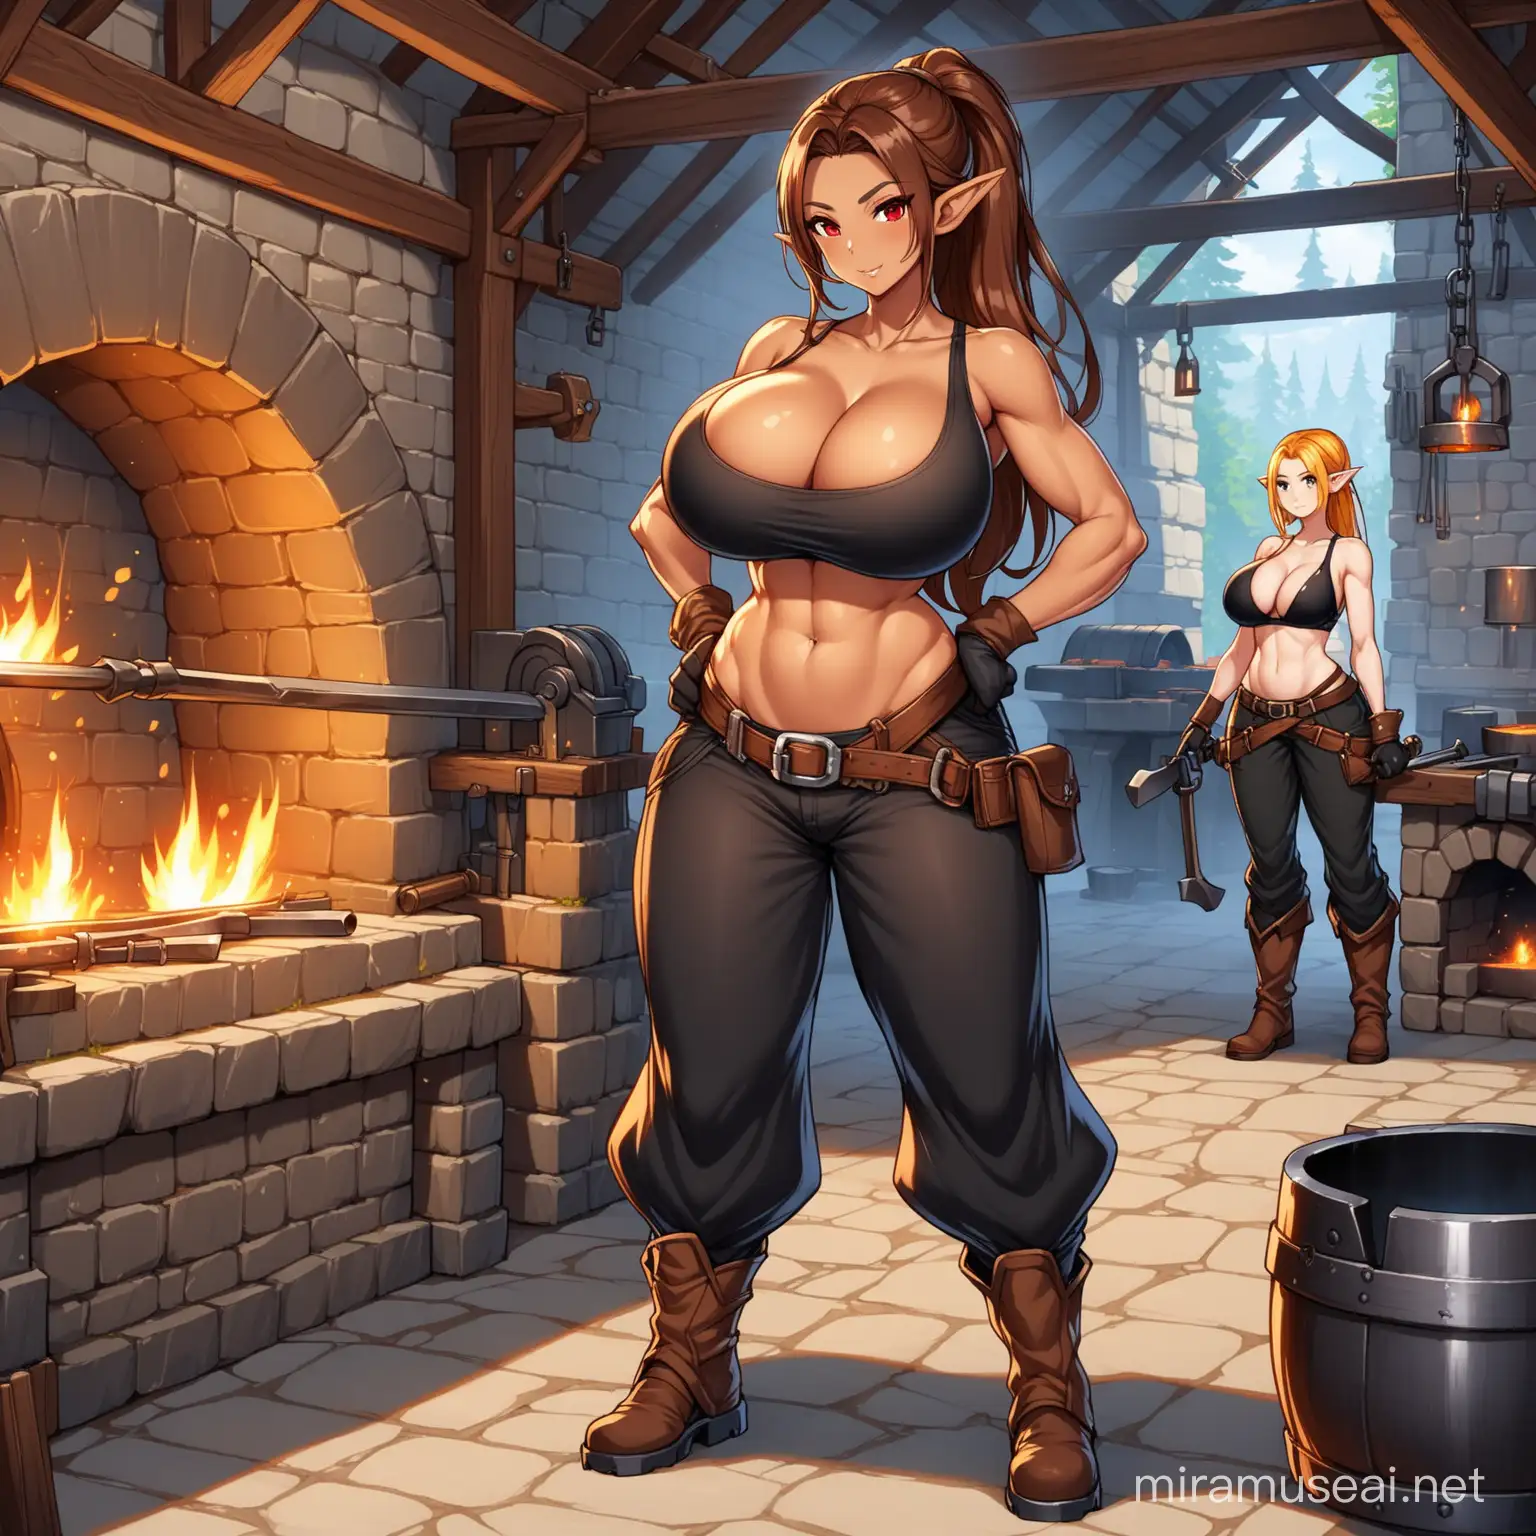 Elegant Elf Blacksmith Crafting with Gigantic Breasts and Goggles